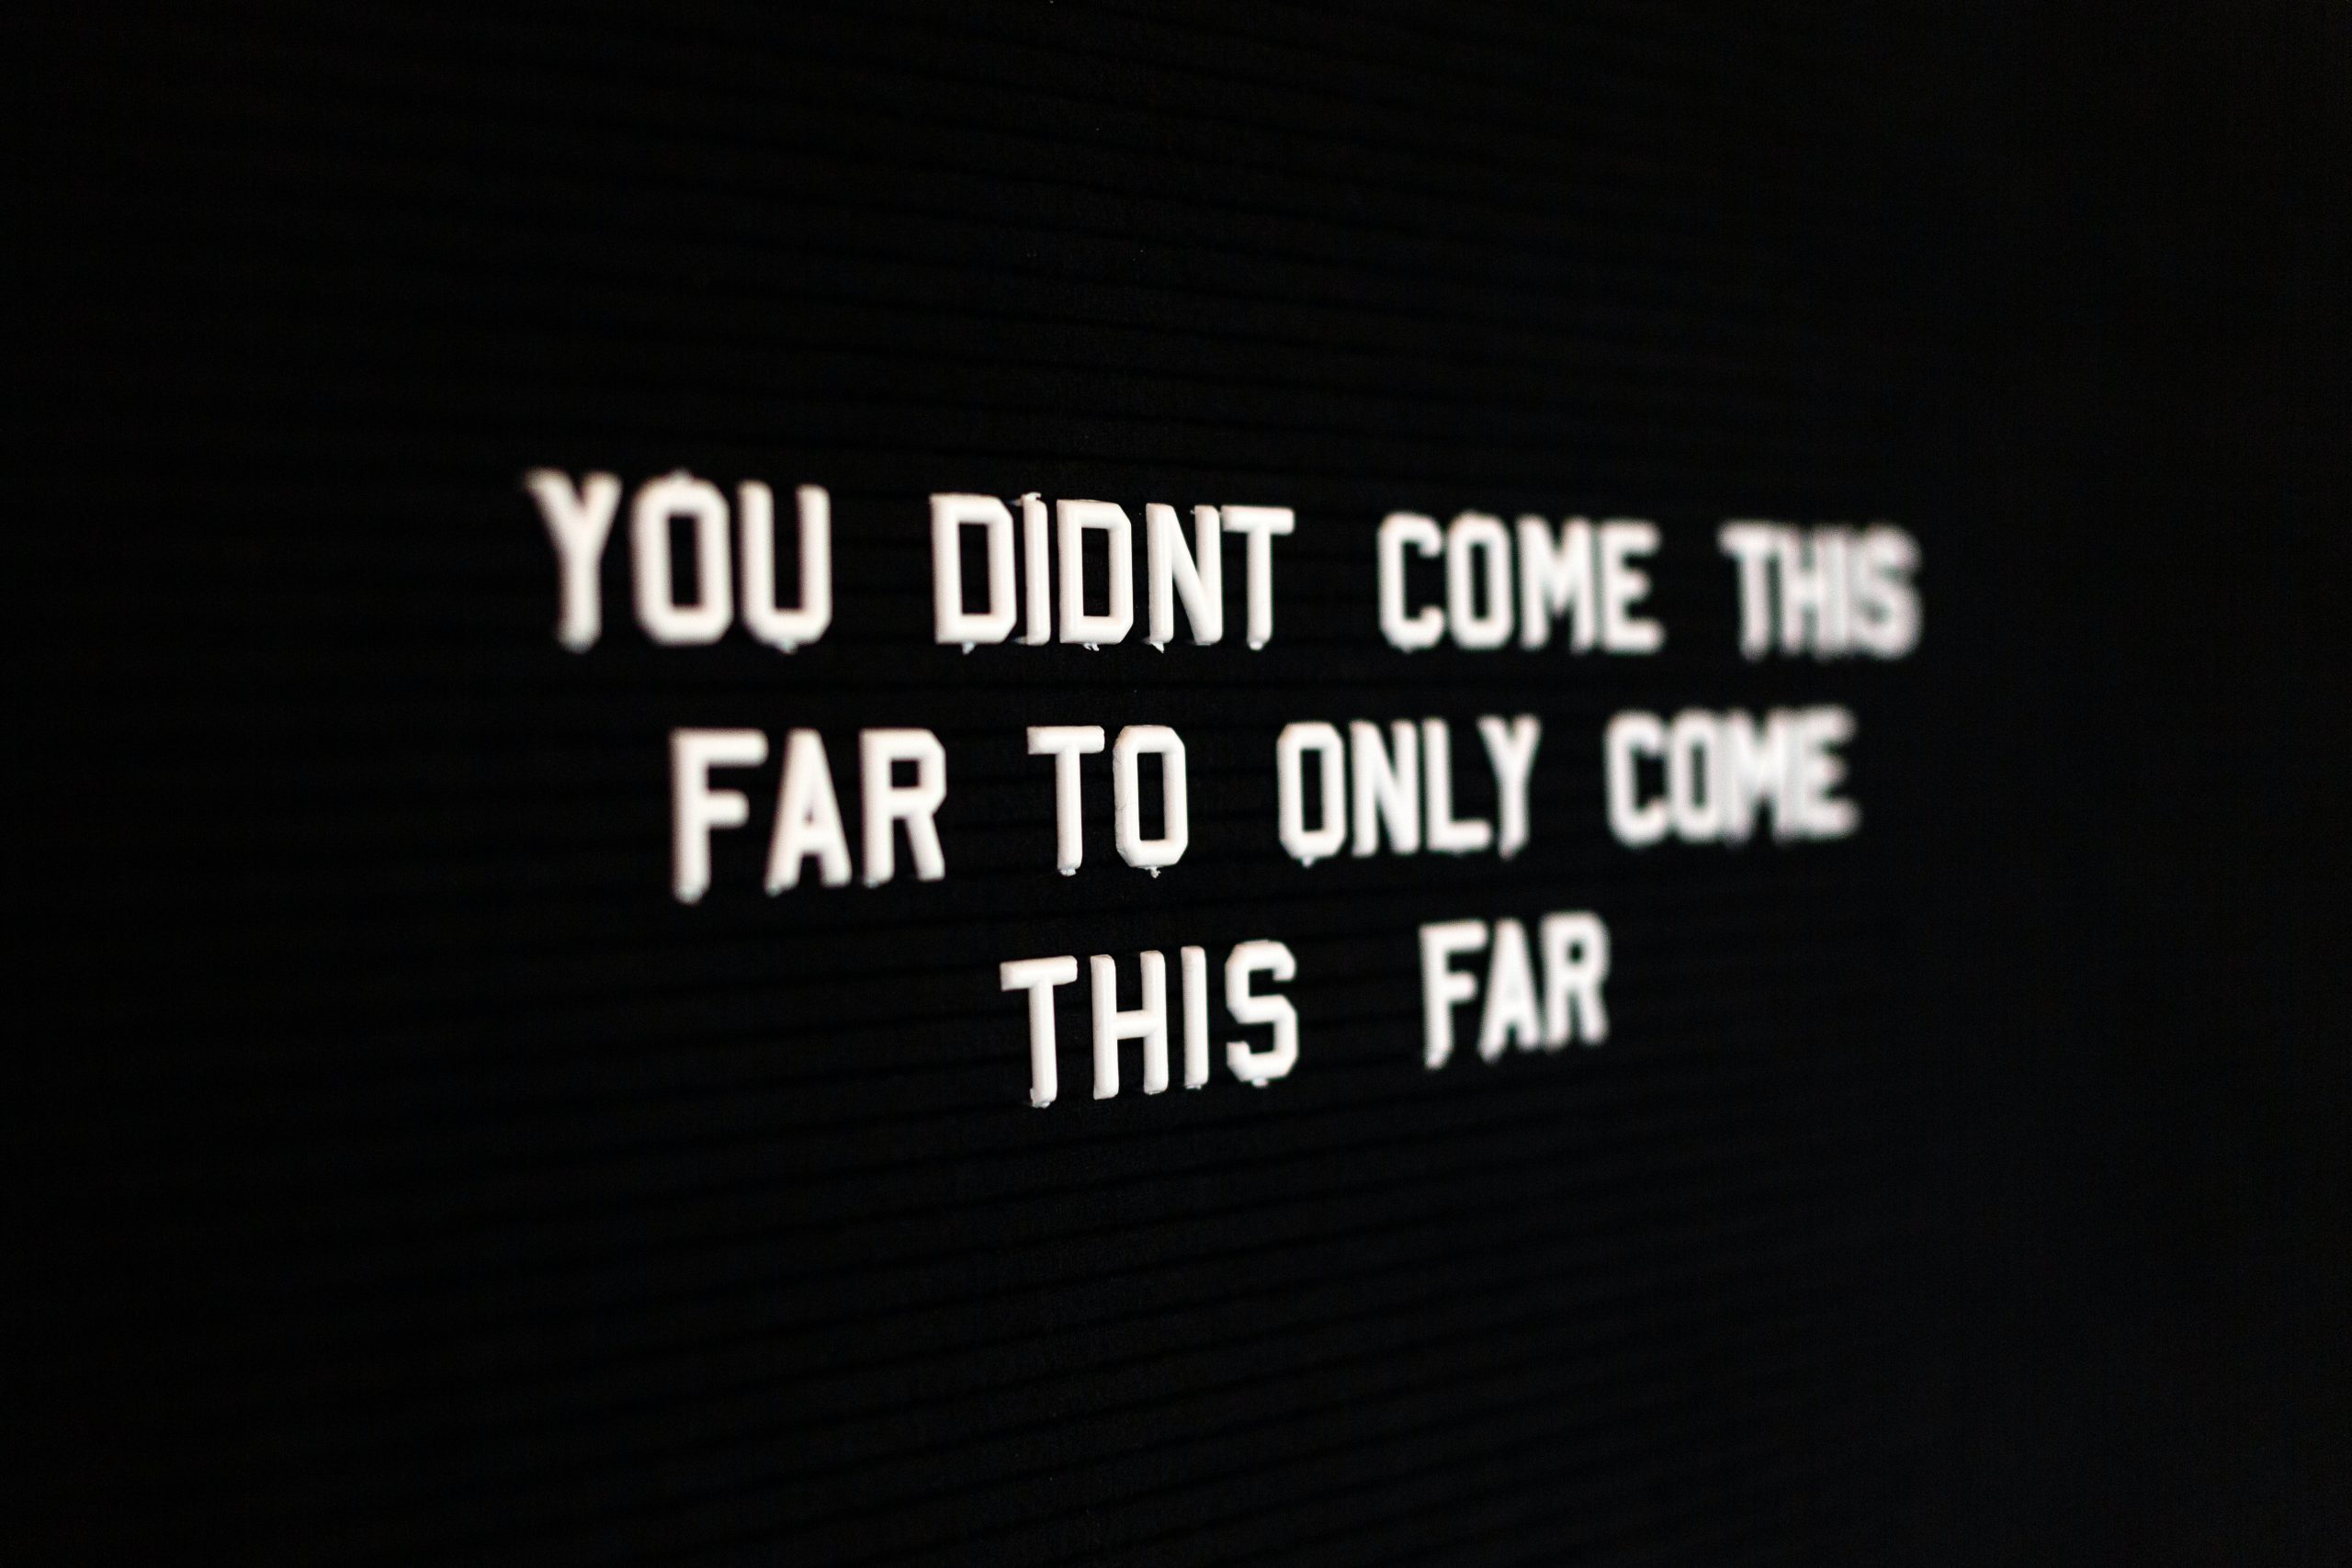 "You didn't come this far to only come this far"